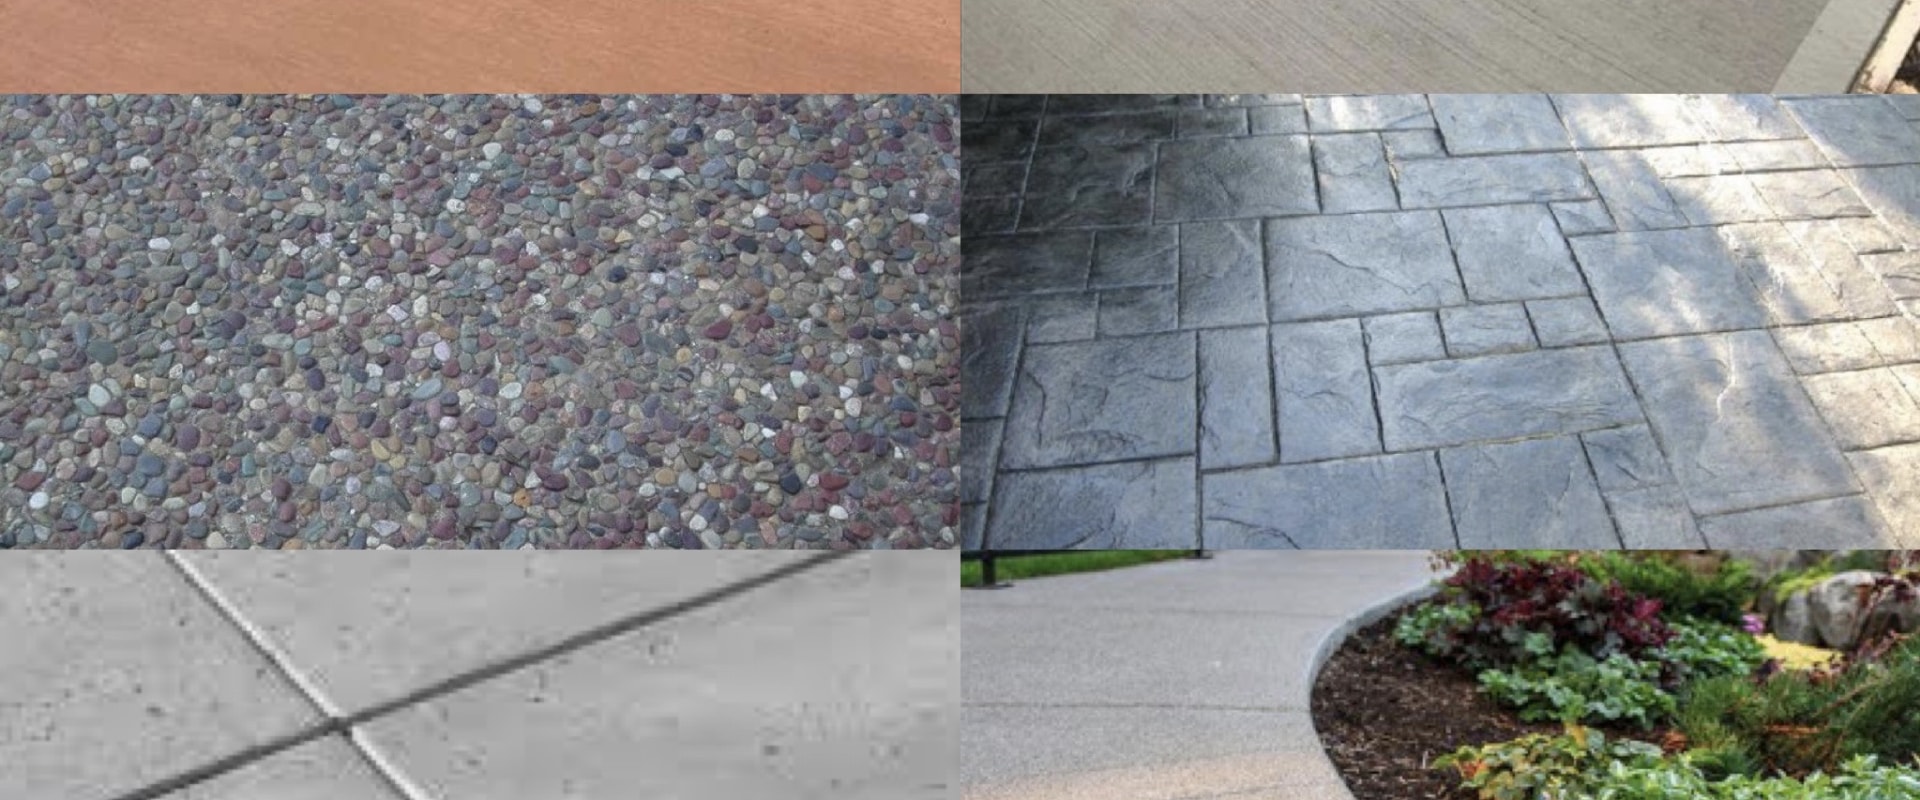 The Benefits of Exposed Aggregates: Is it Better than Concrete?